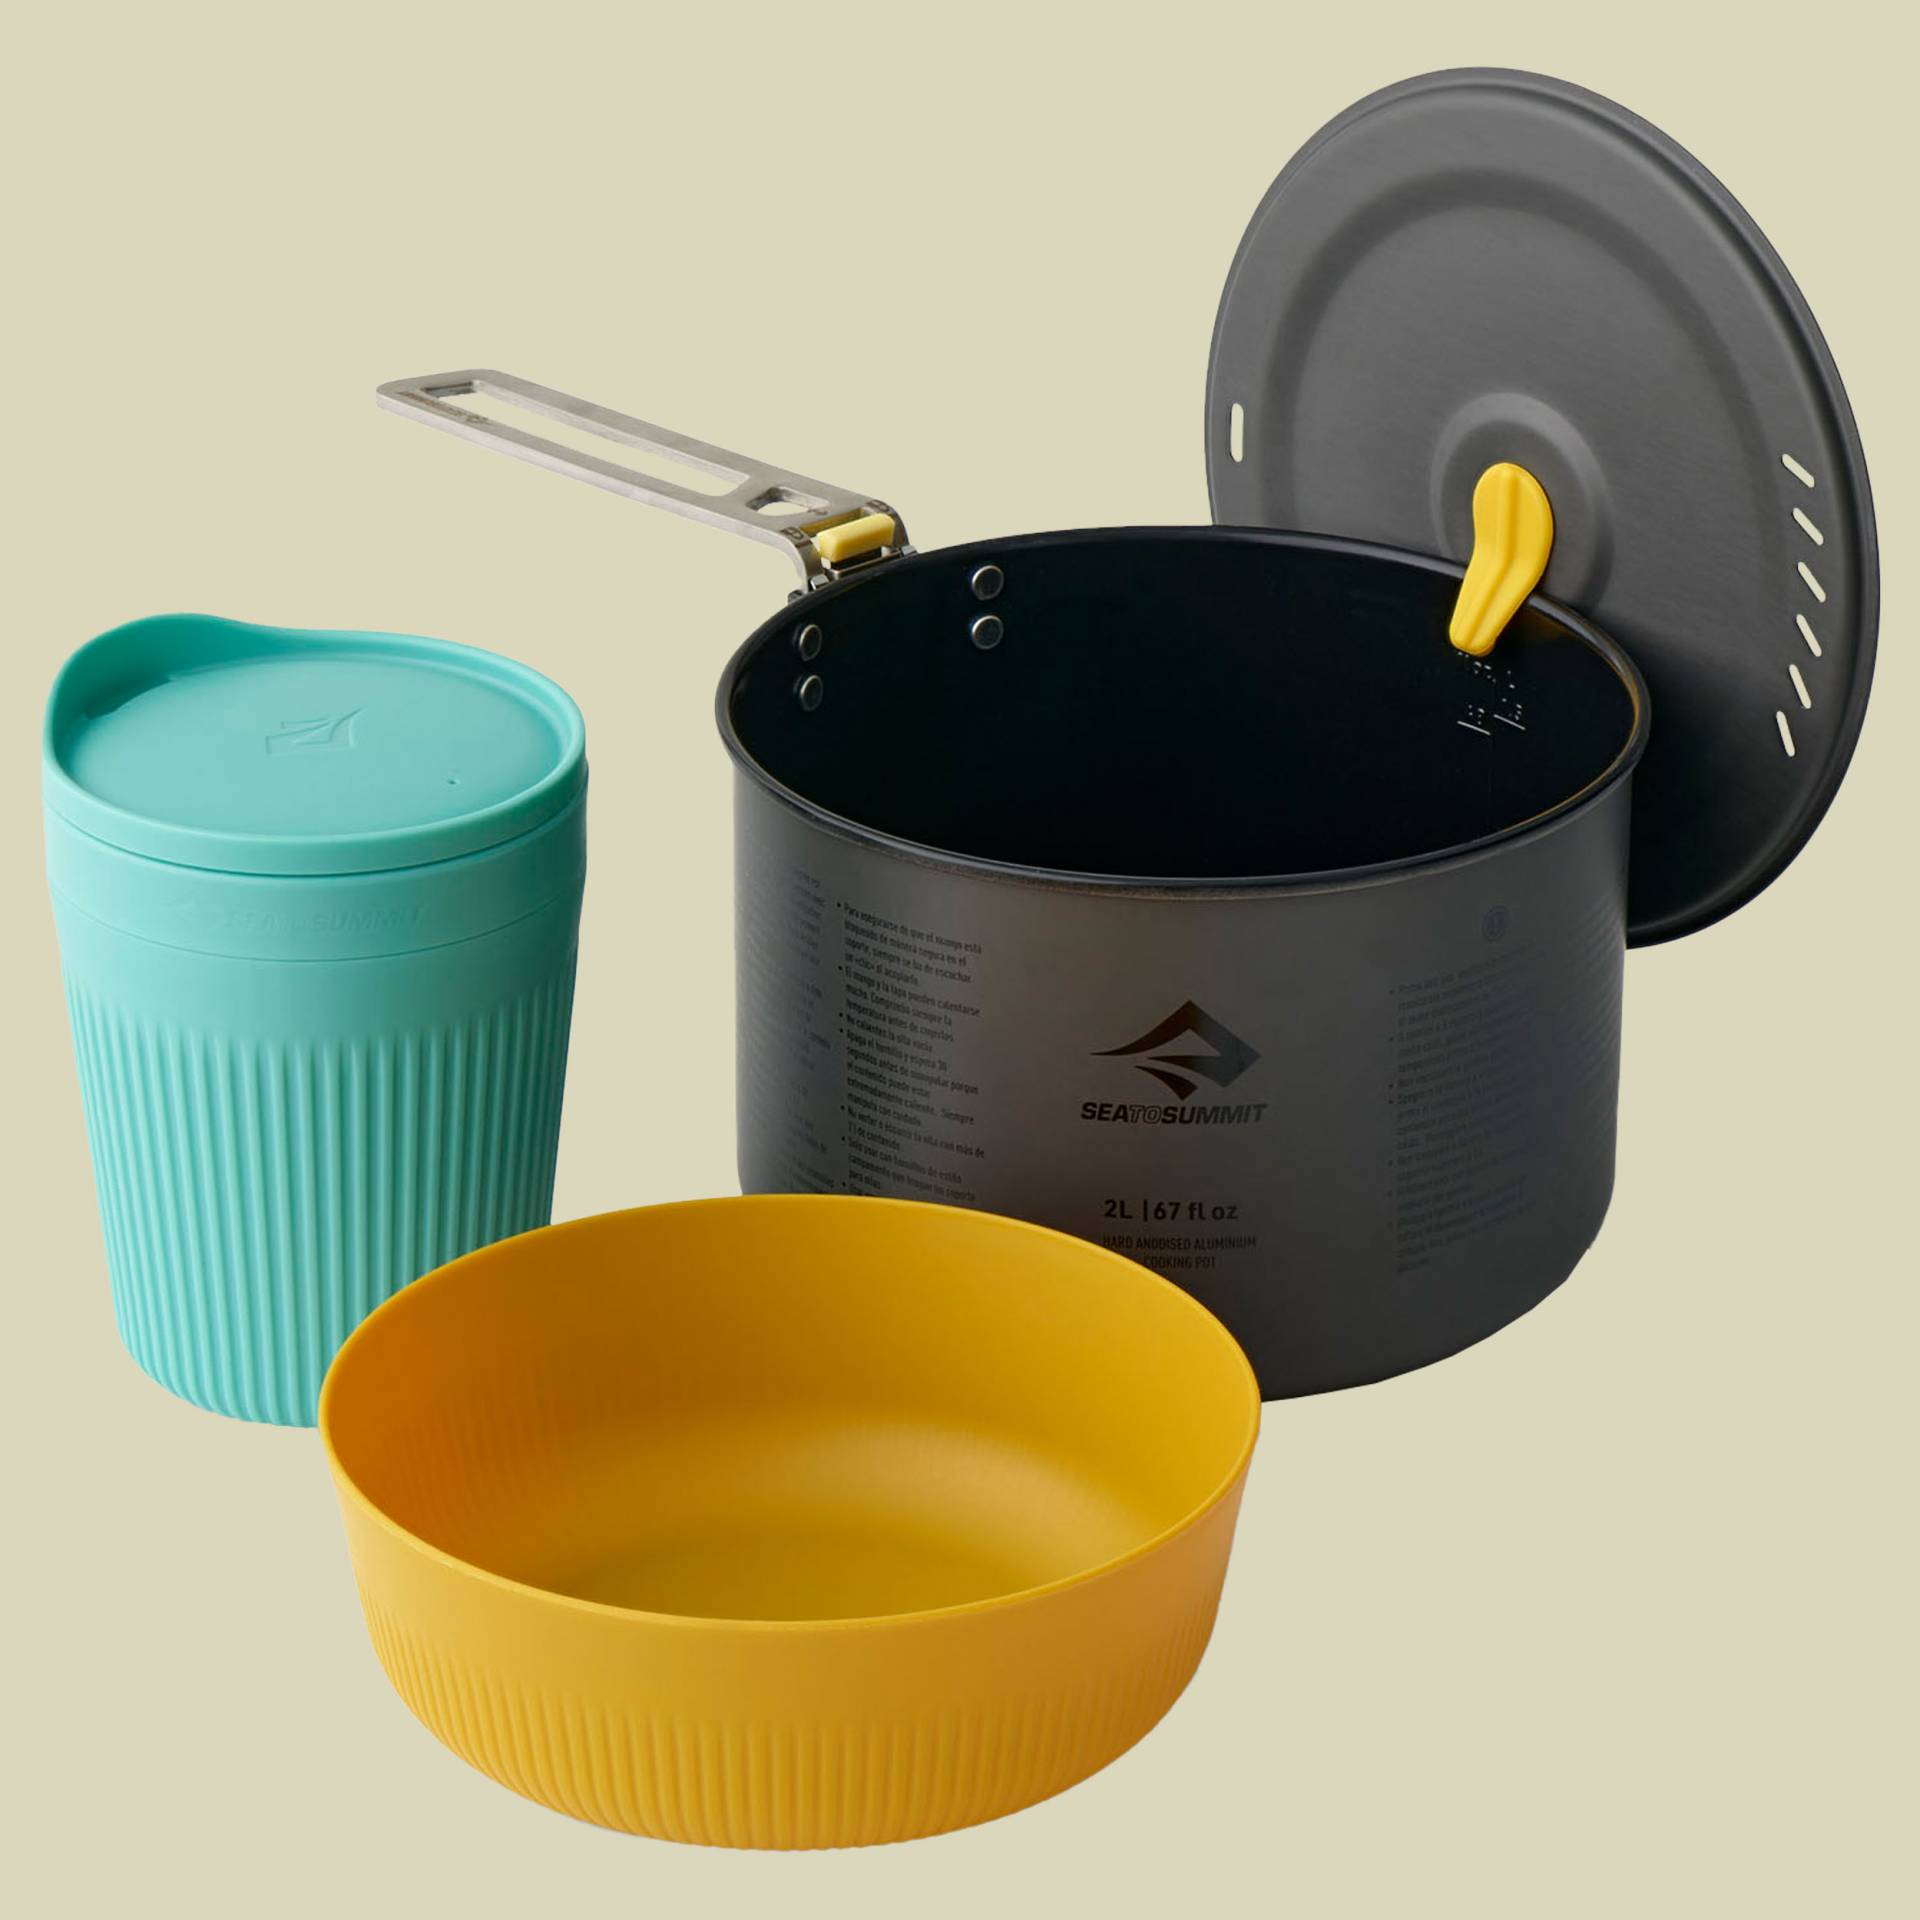 Frontier UL One Pot Cook Set - [1P] [3 Piece] 1 Person - 2L Pot w/ M Bowl and Ins Mug von Sea to Summit